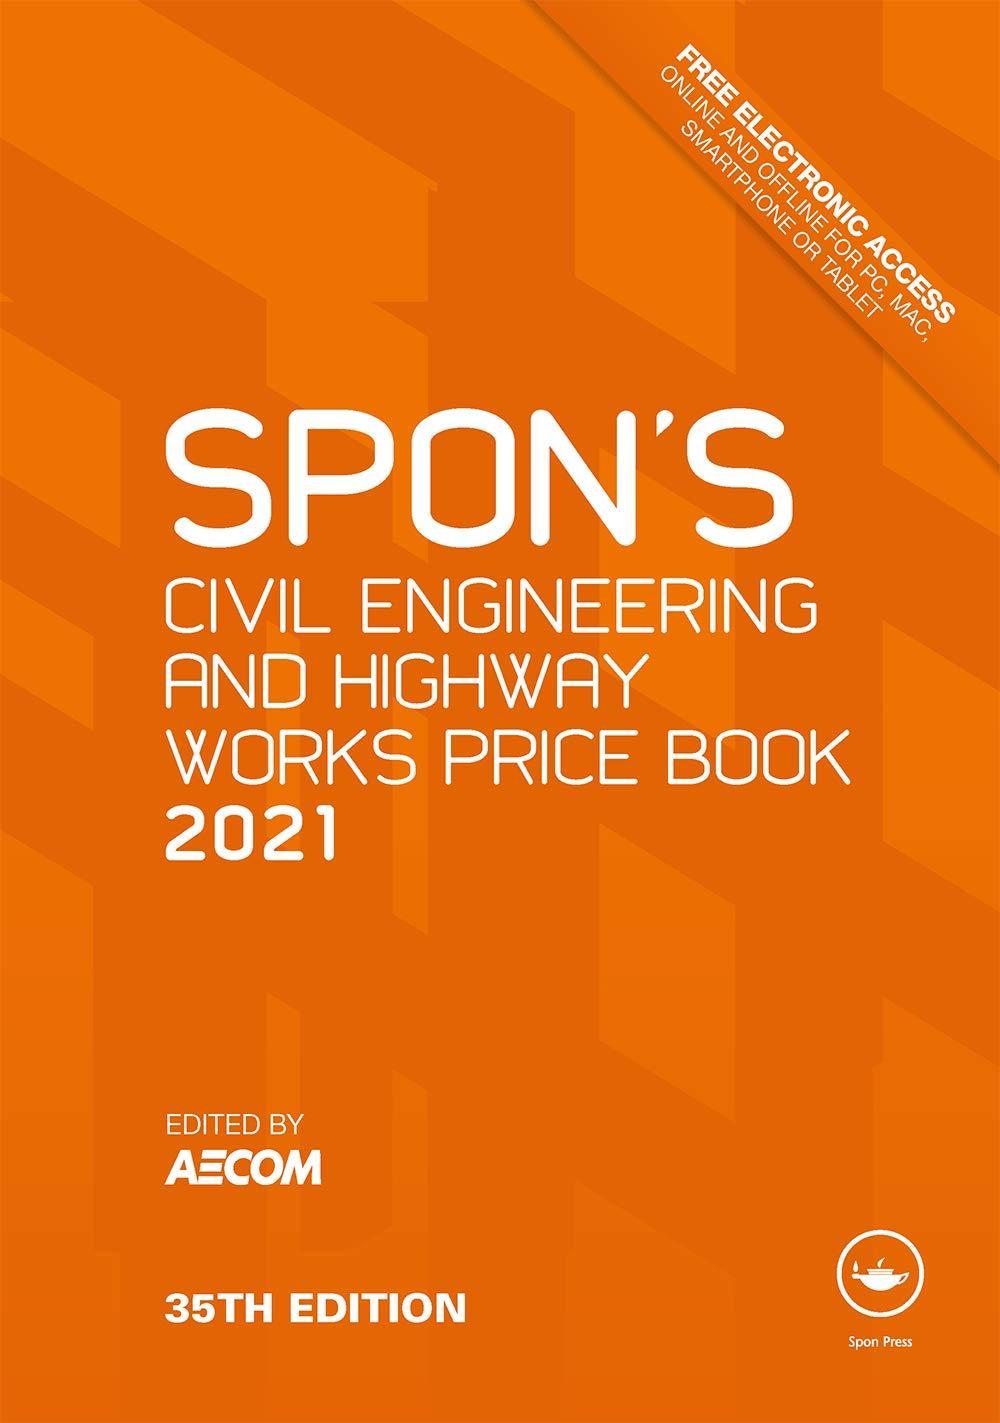 spons civil engineering and highway works price book 2021 35th edition aecom 0367514036, 978-0367514037